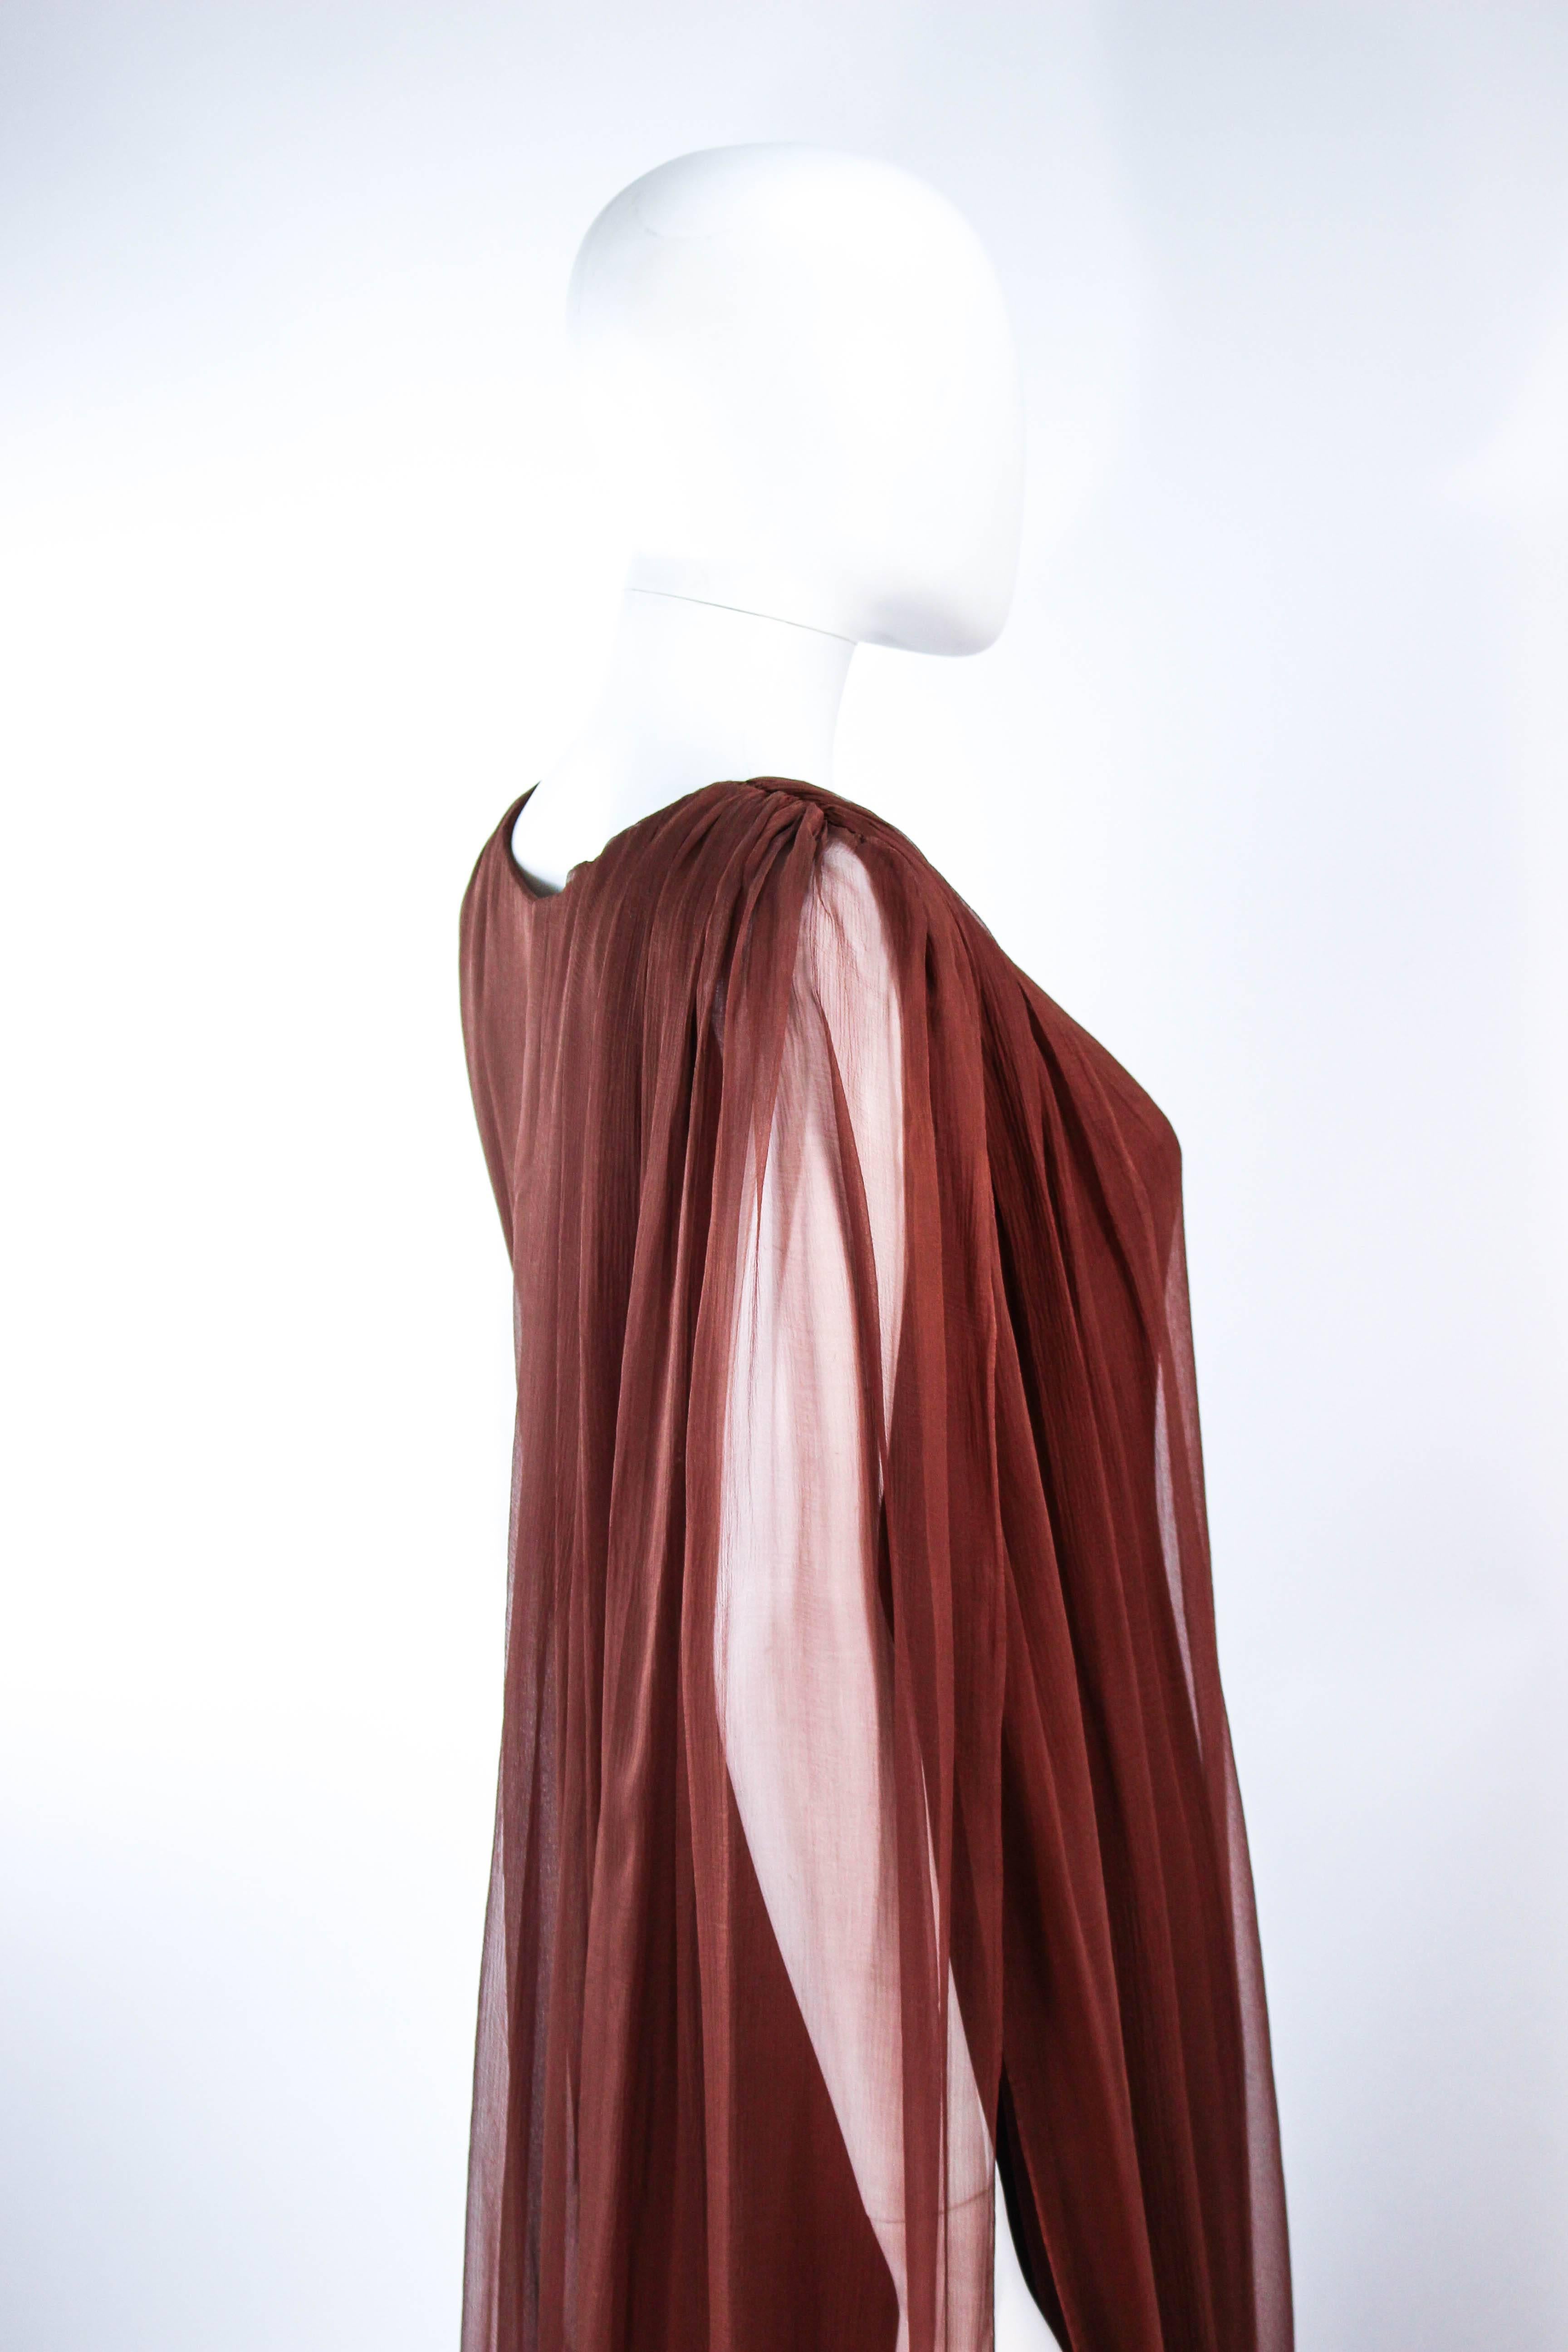 GALANOS 1970's Brown Silk Chiffon Draped Gown Size 4 6 For Sale 4